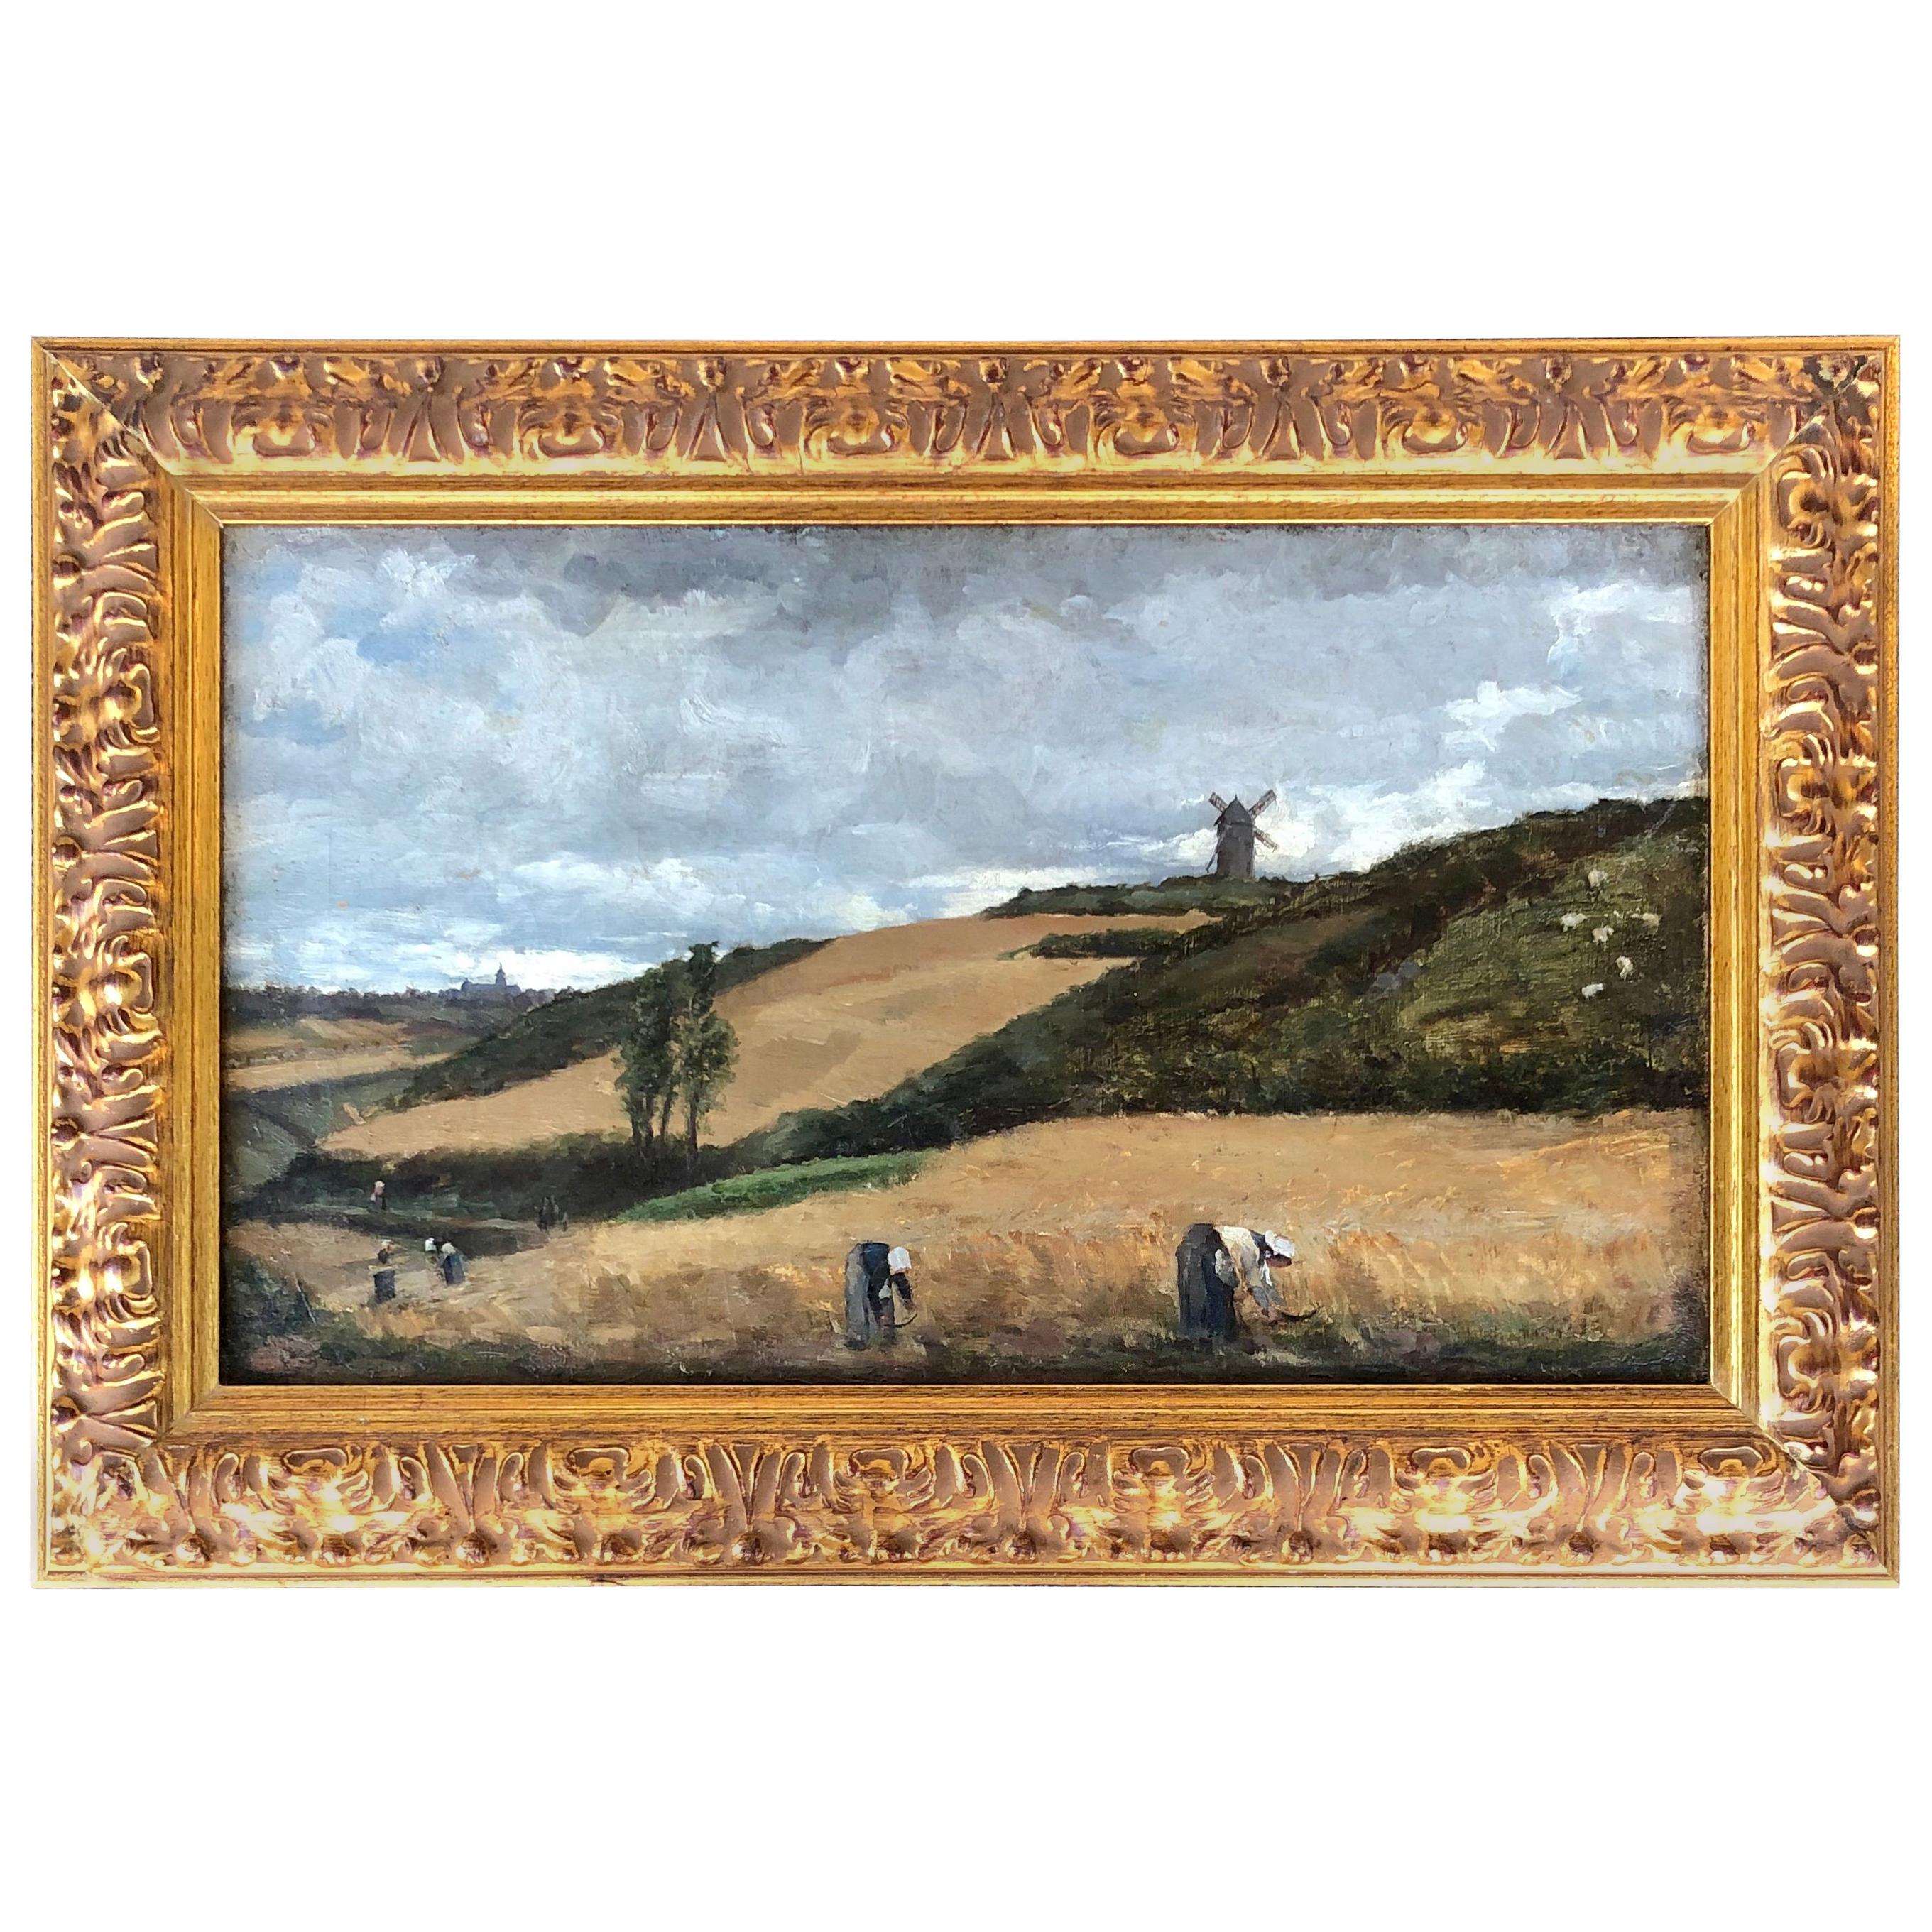 “The Harvest, Brittany” Attributed to Julian Alden Weir, Exhibited